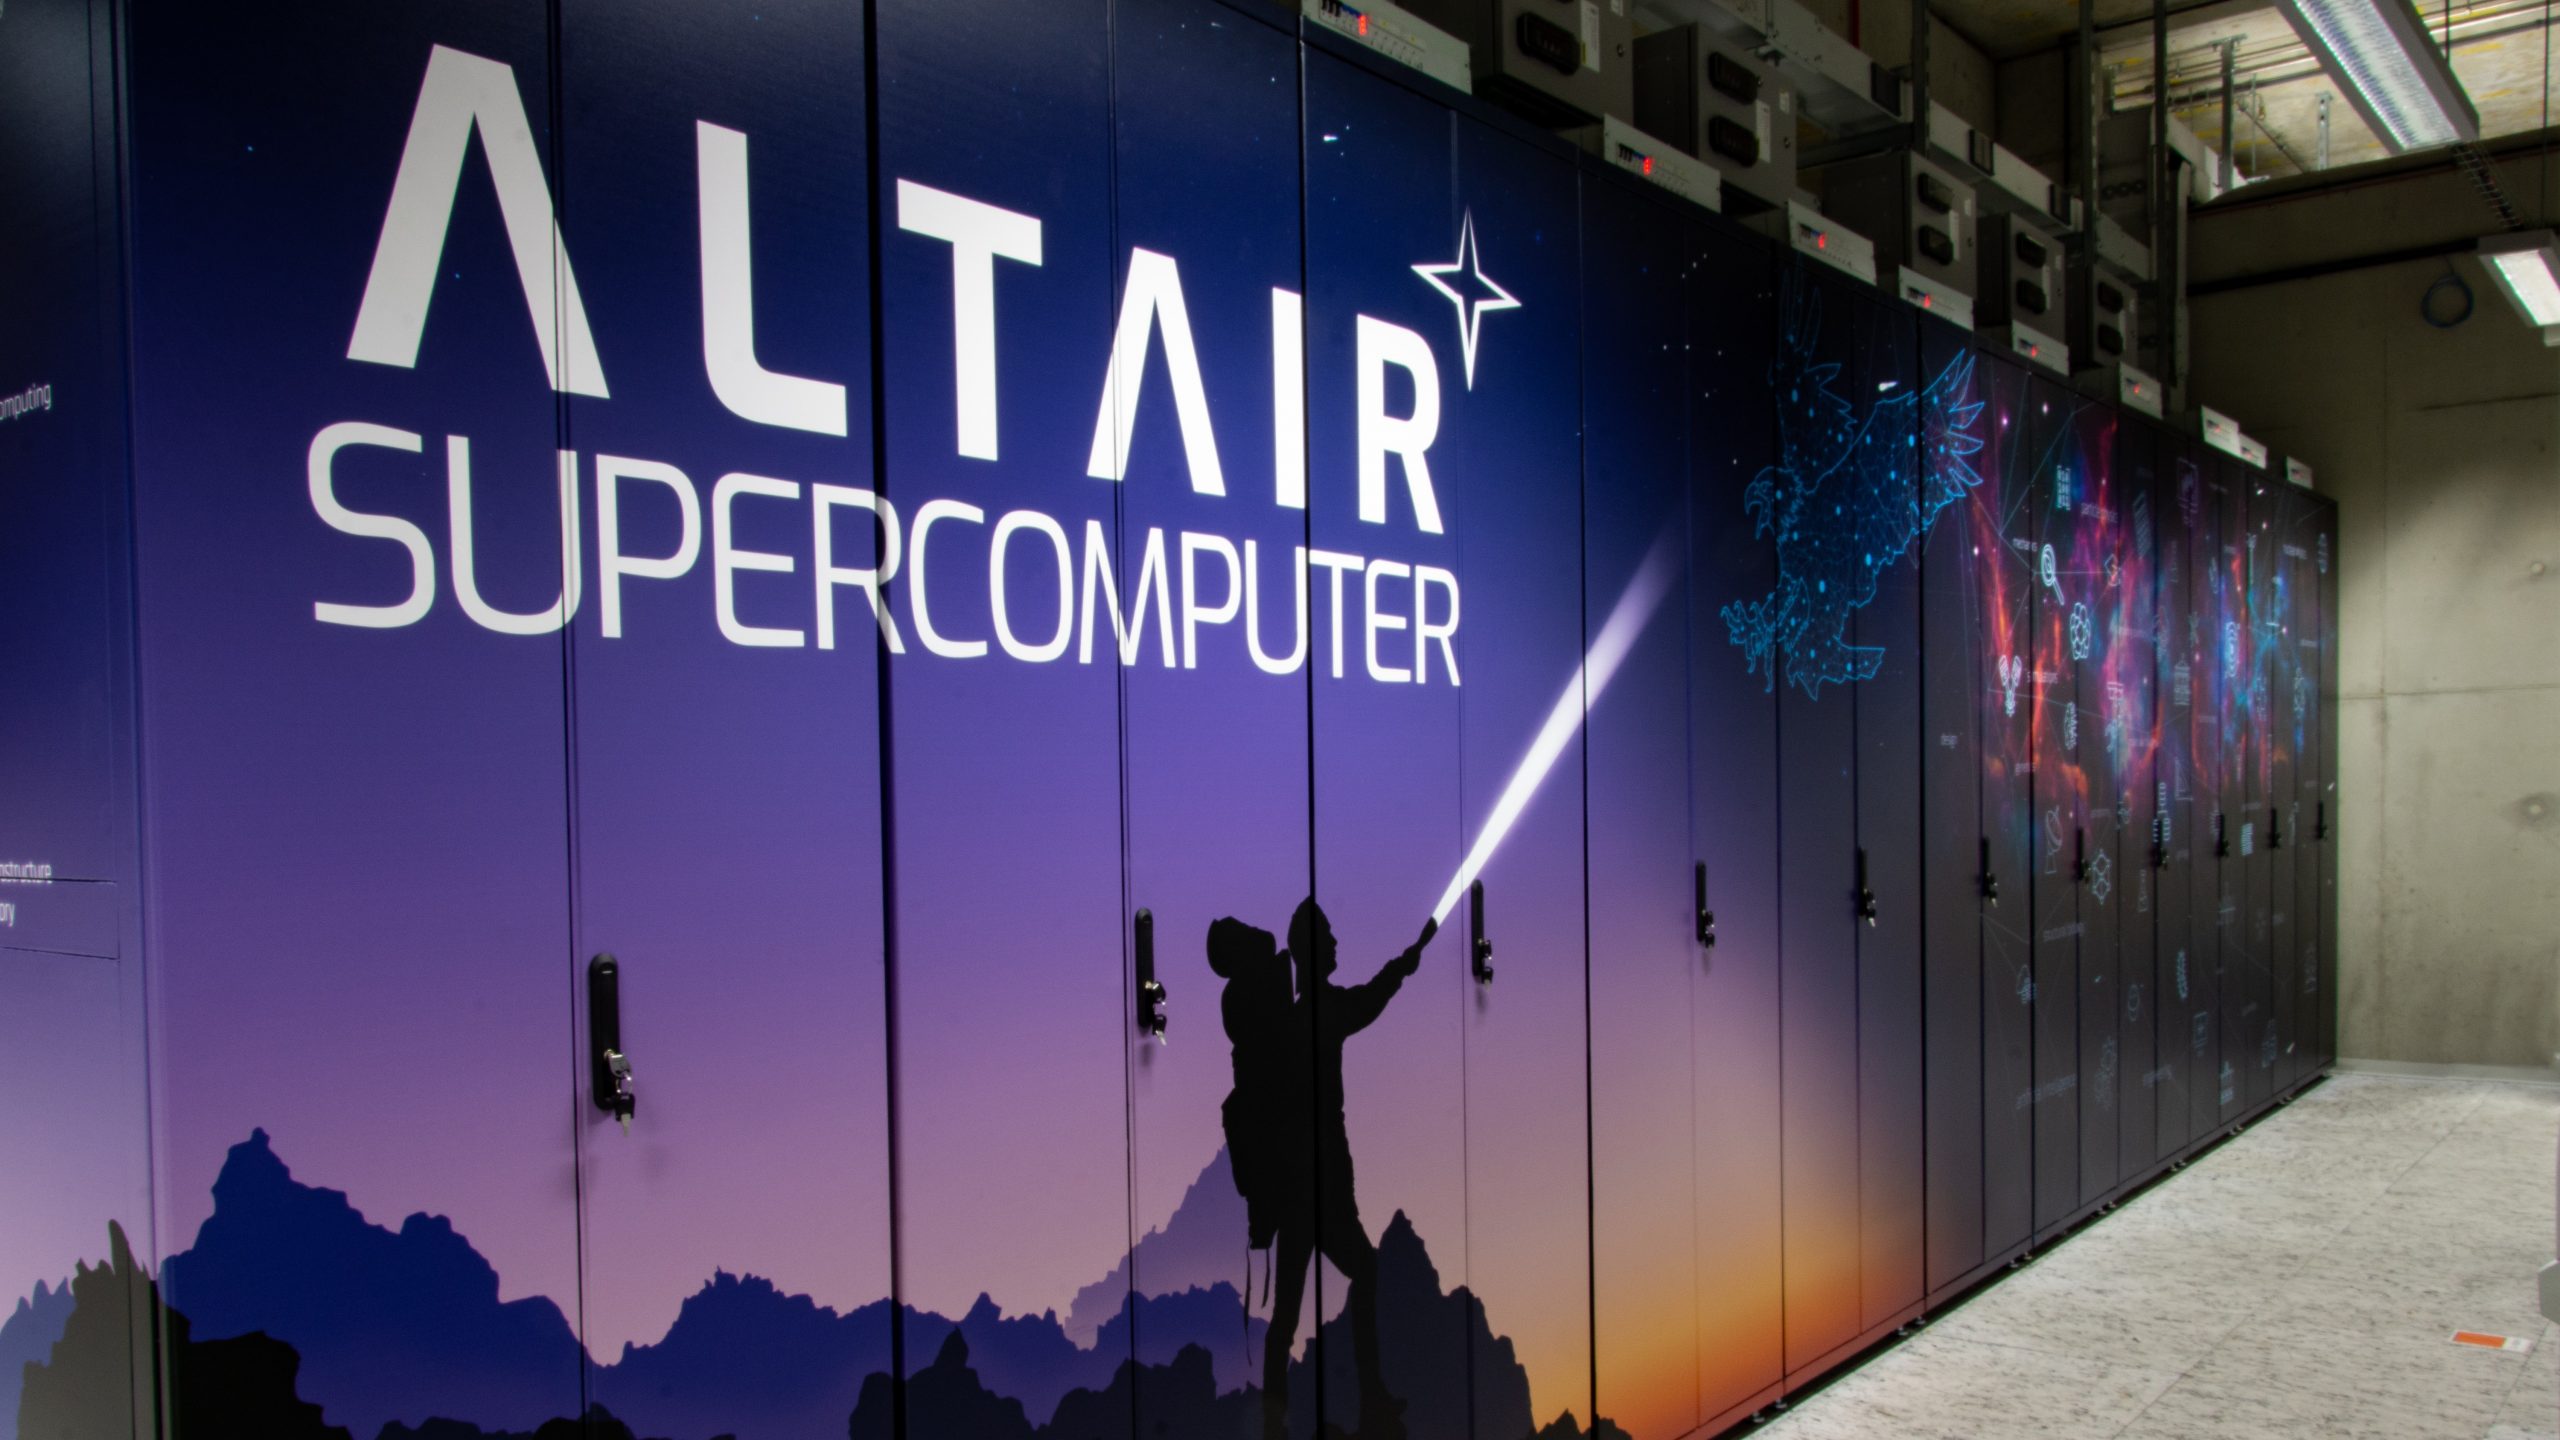 Altair supercomputer is fully operational and ready to go